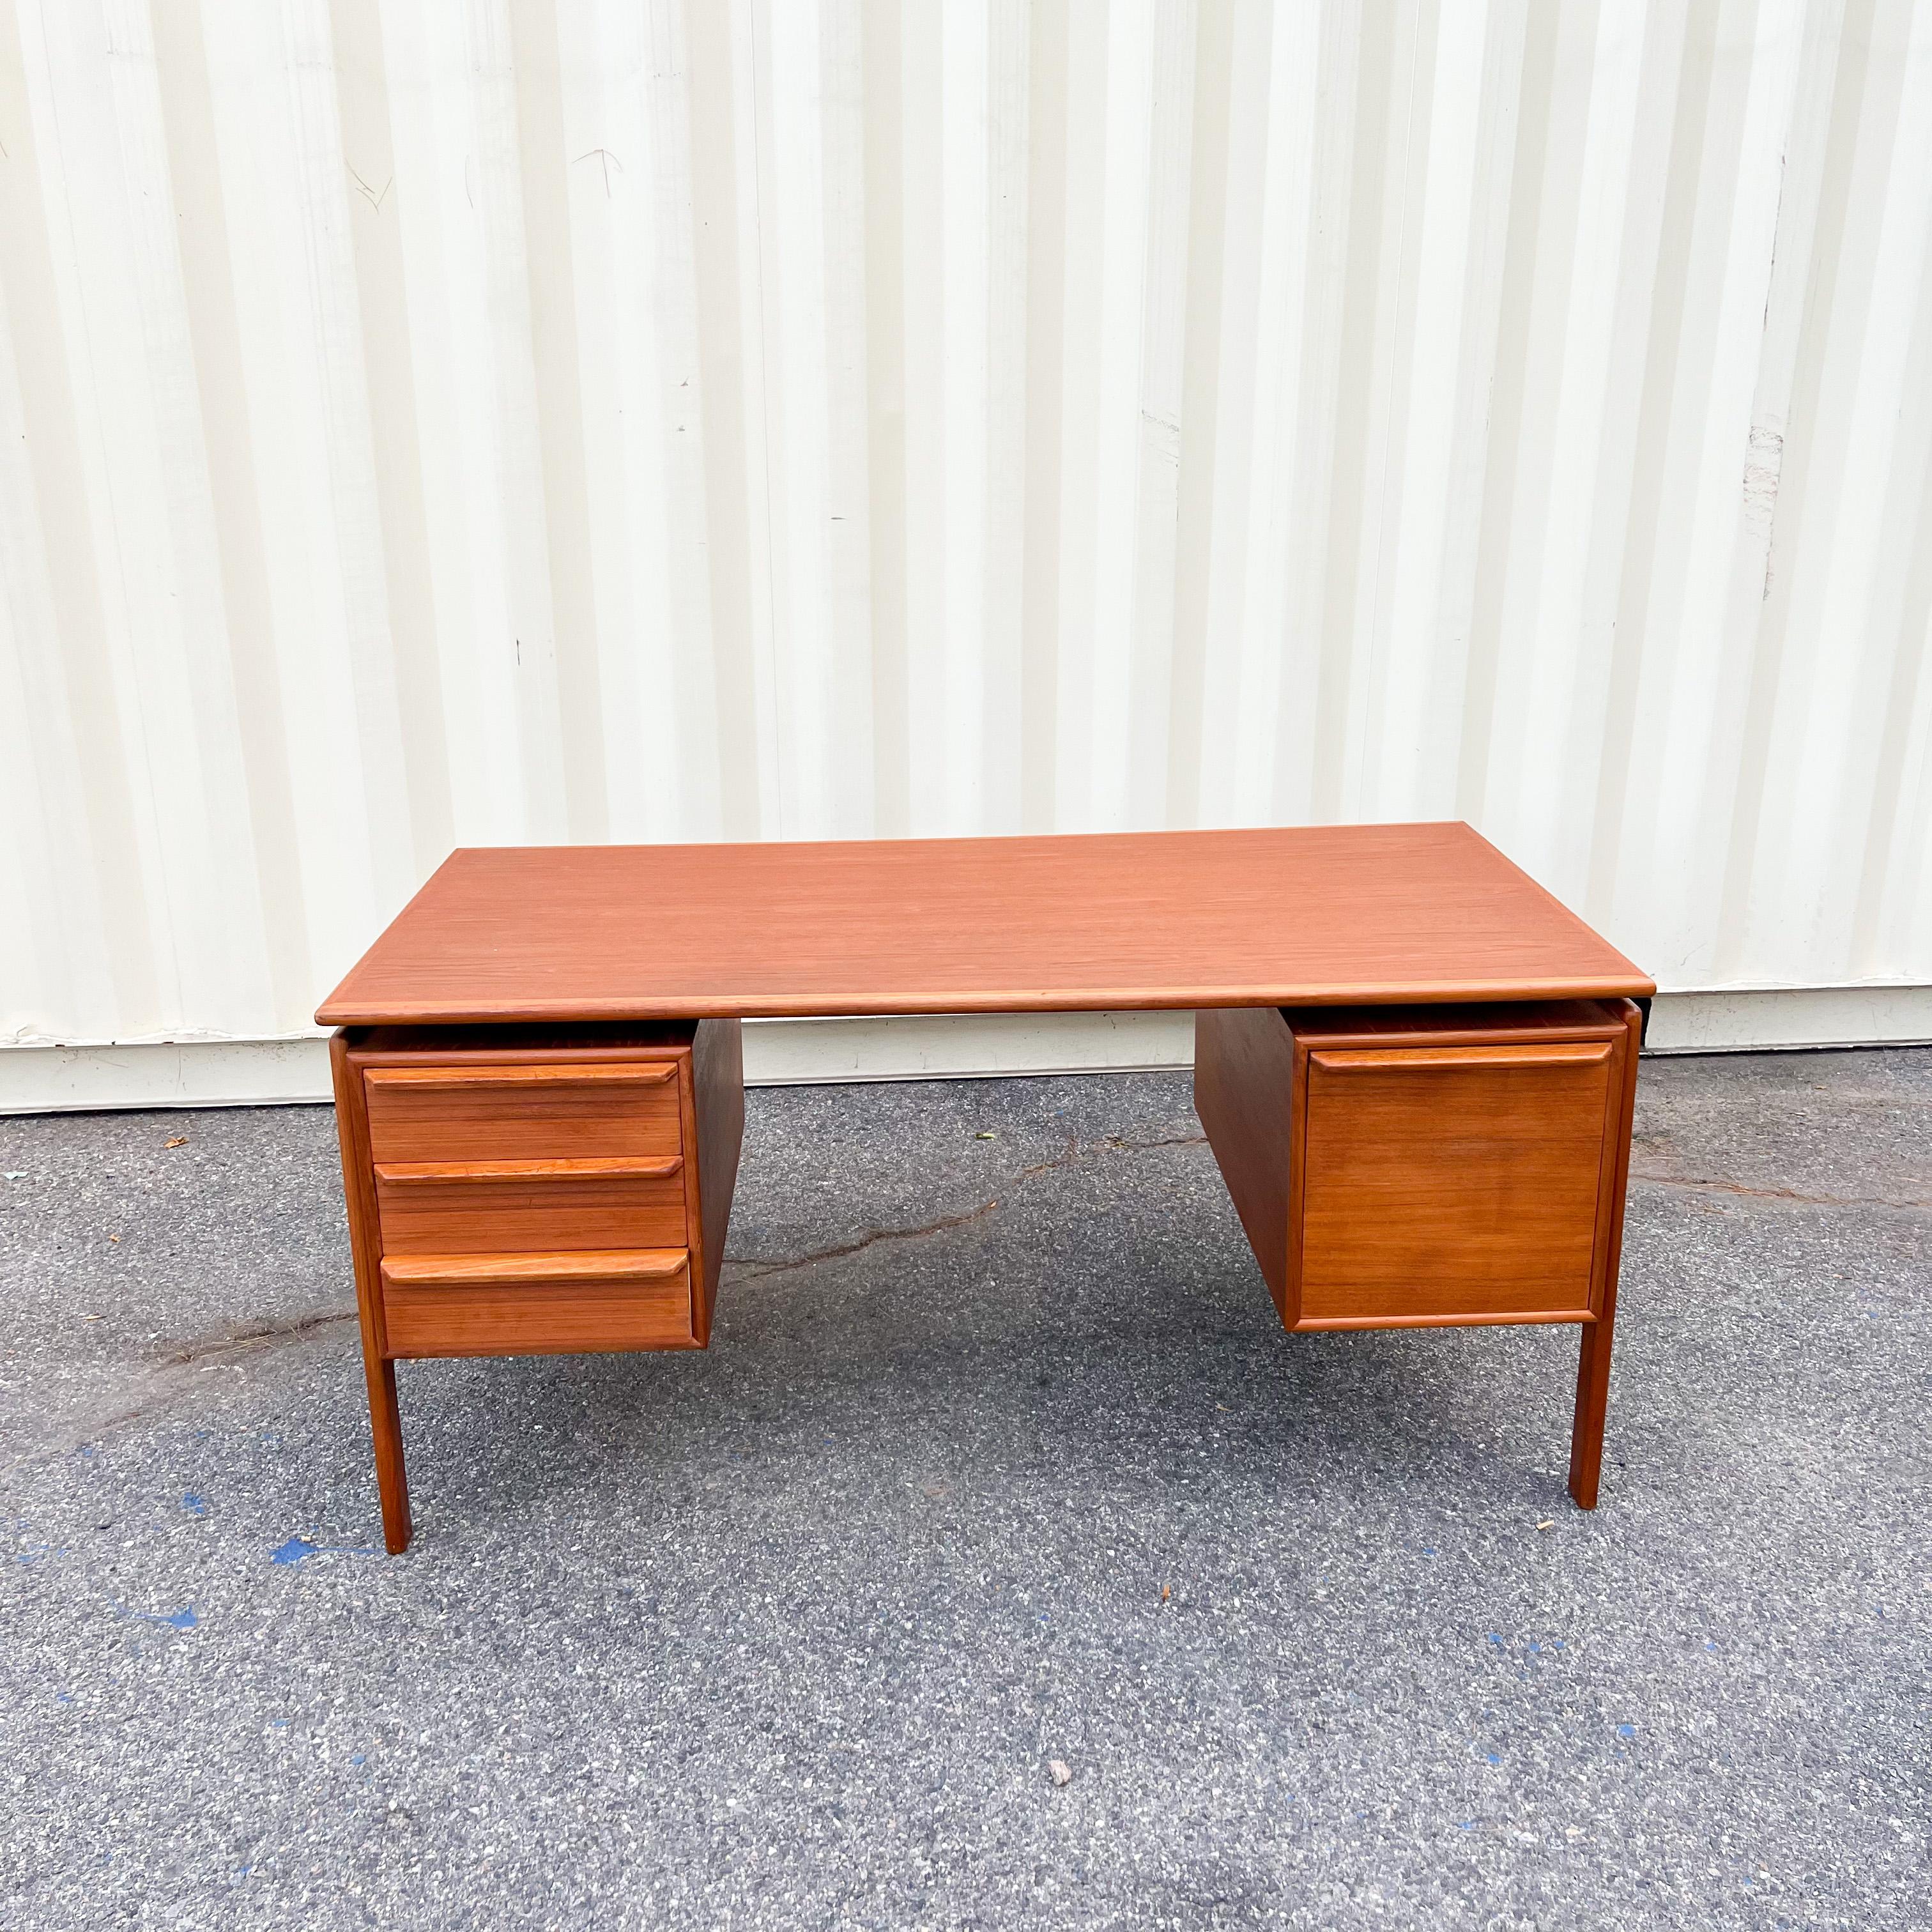 Stunning Danish modern floating top teak desk manufactured by G.V. Møbler in Denmark, circa 1960s. On the left side features three dovetail drawers, and on the right side, it has a wide file drawer with aluminum rails that facilitate the sliding of